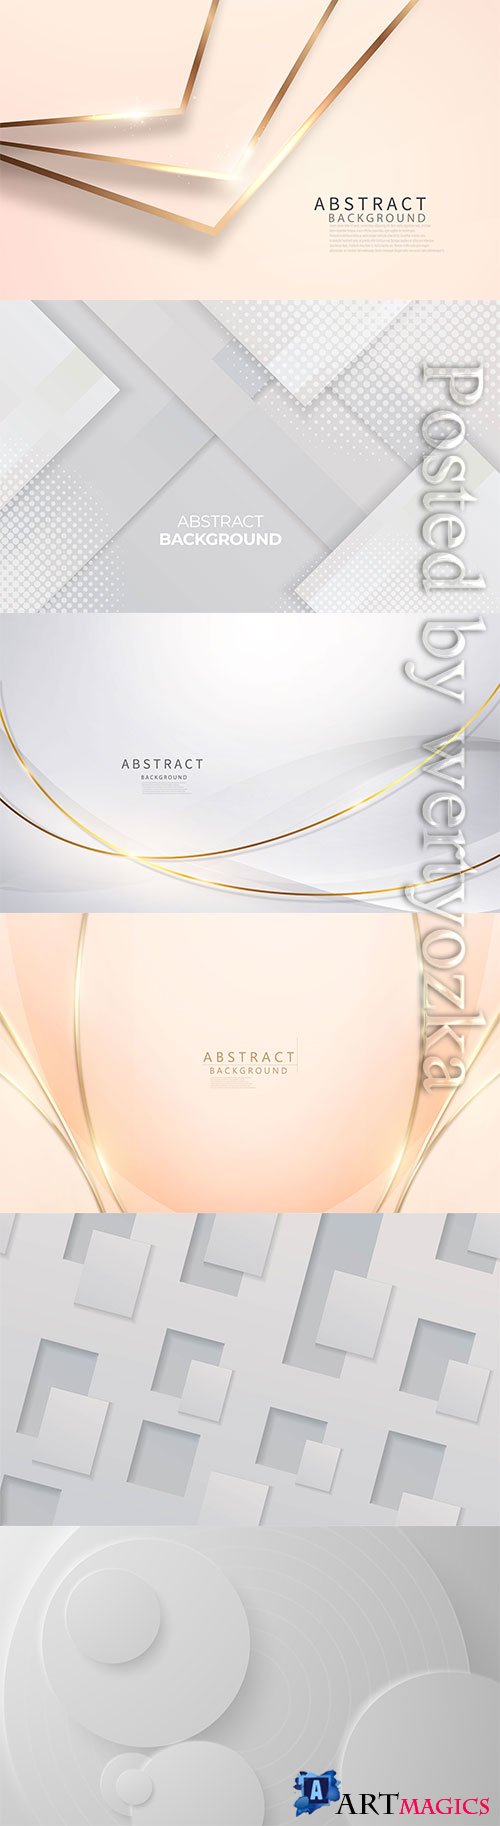 Light abstract backgrounds in vector